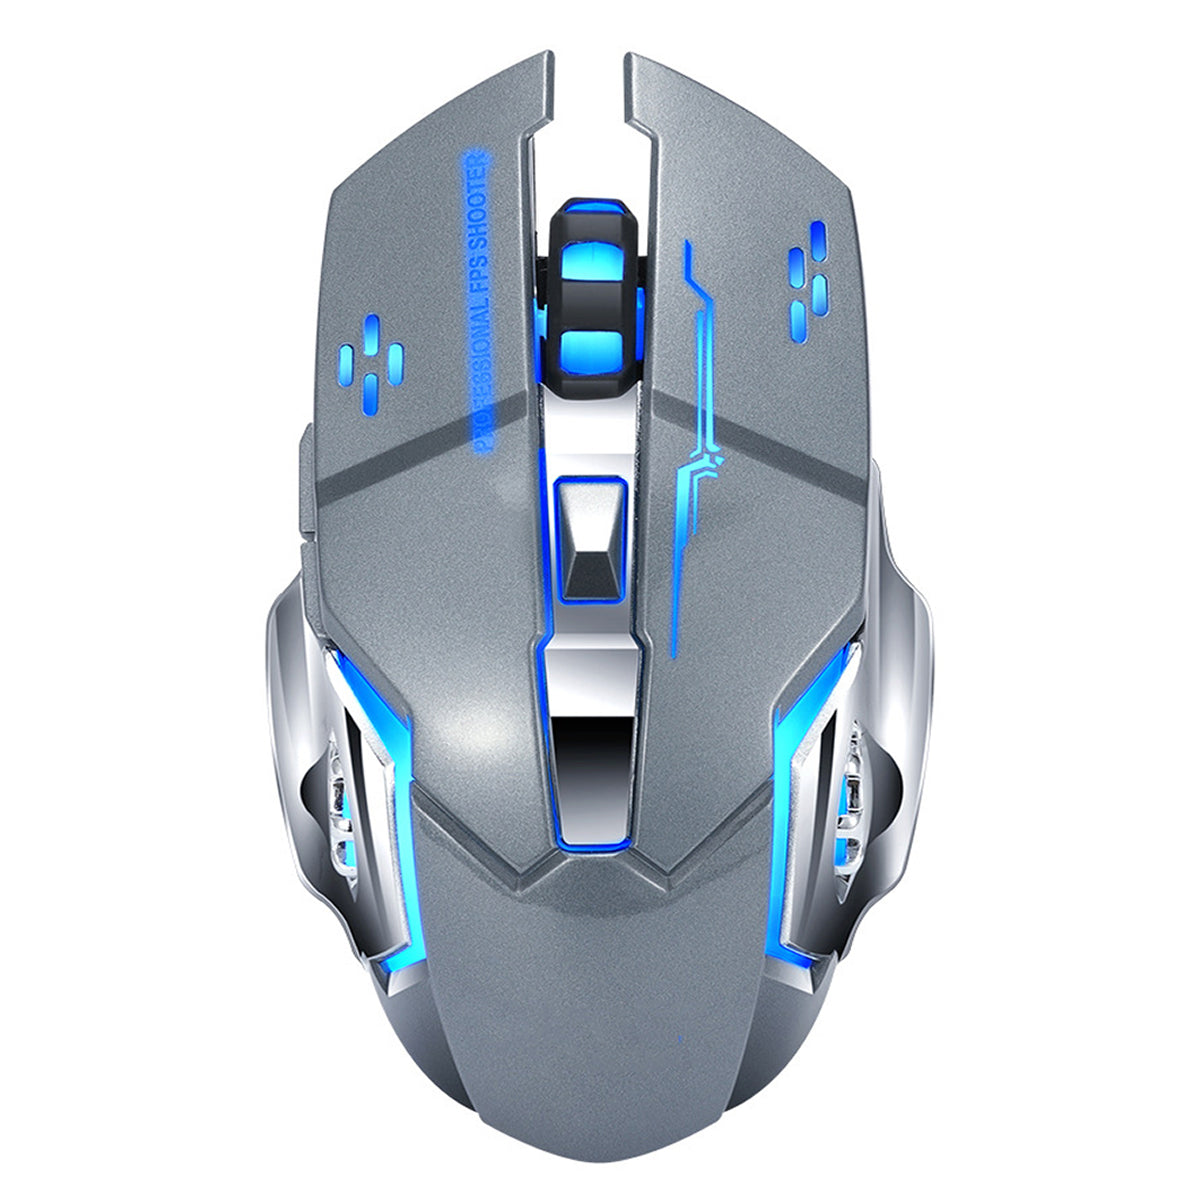 Verilux Gaming Mouse, RGB Multi-Colour 3200DPI Wired Silent Mice Computer Accessories, for Home Office Games 6 Buttons Multiple Functions (Silent Mute Gaming Mouse)